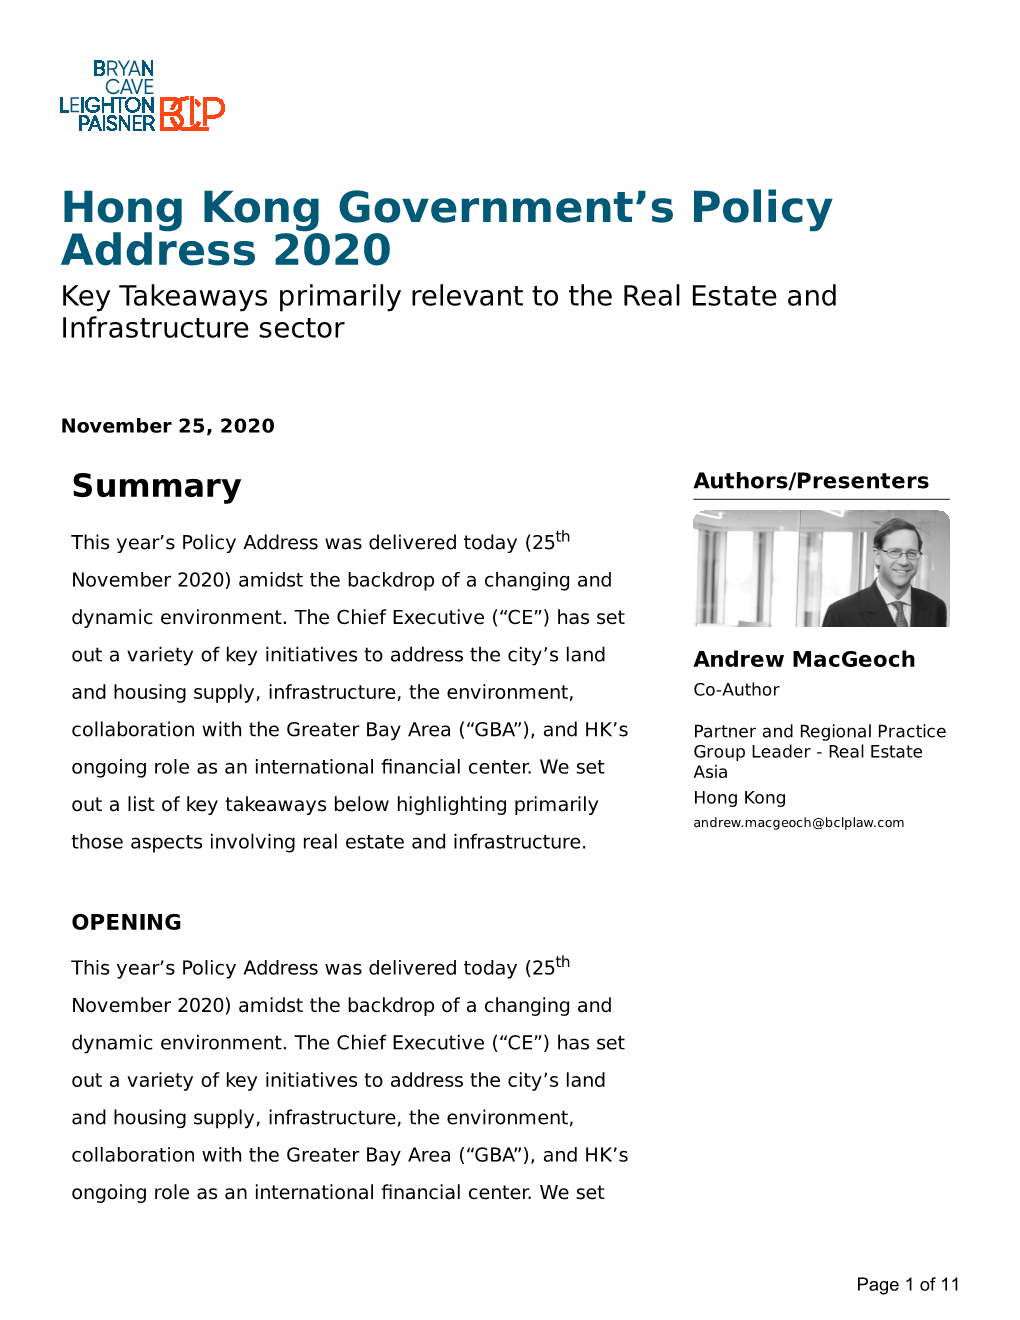 Hong Kong Government's Policy Address 2020